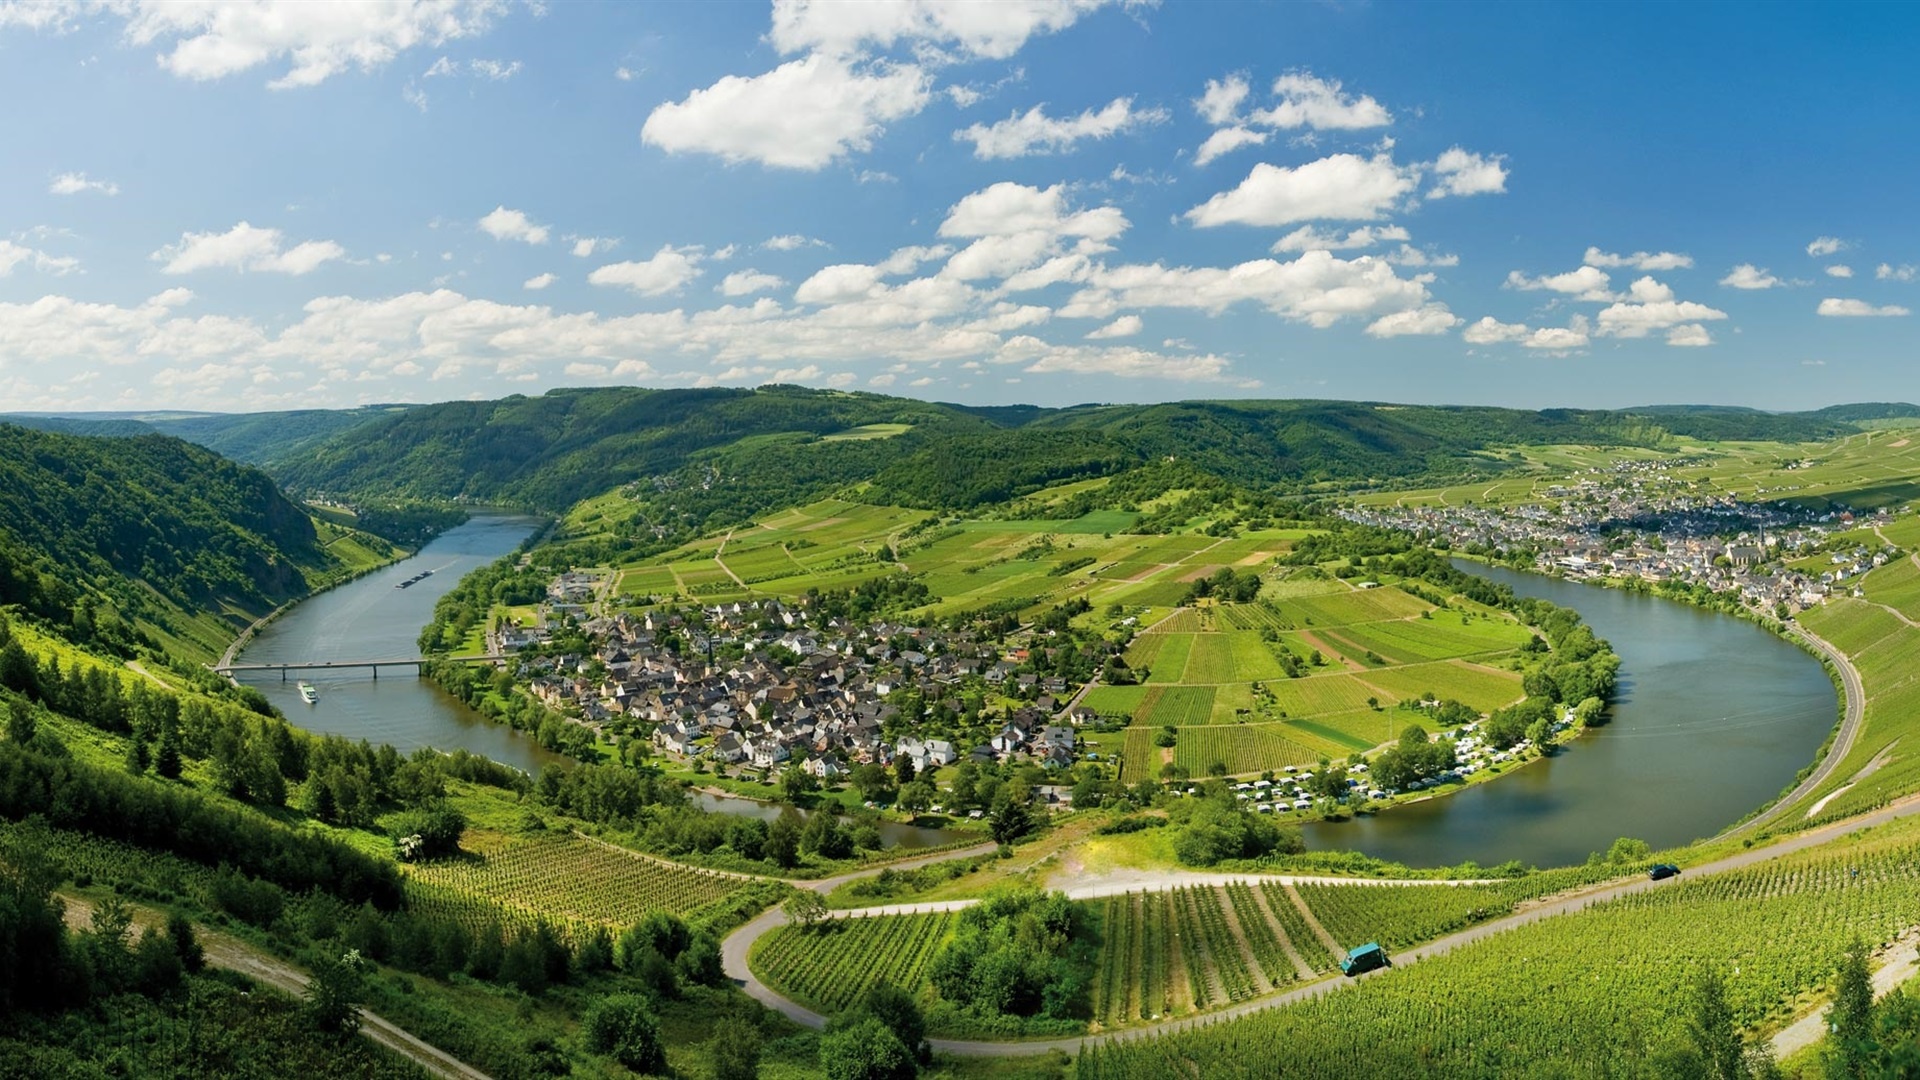 The Rhine River, Germany Mosel houses, river fields, mountains, 1920x1080 Full HD Desktop